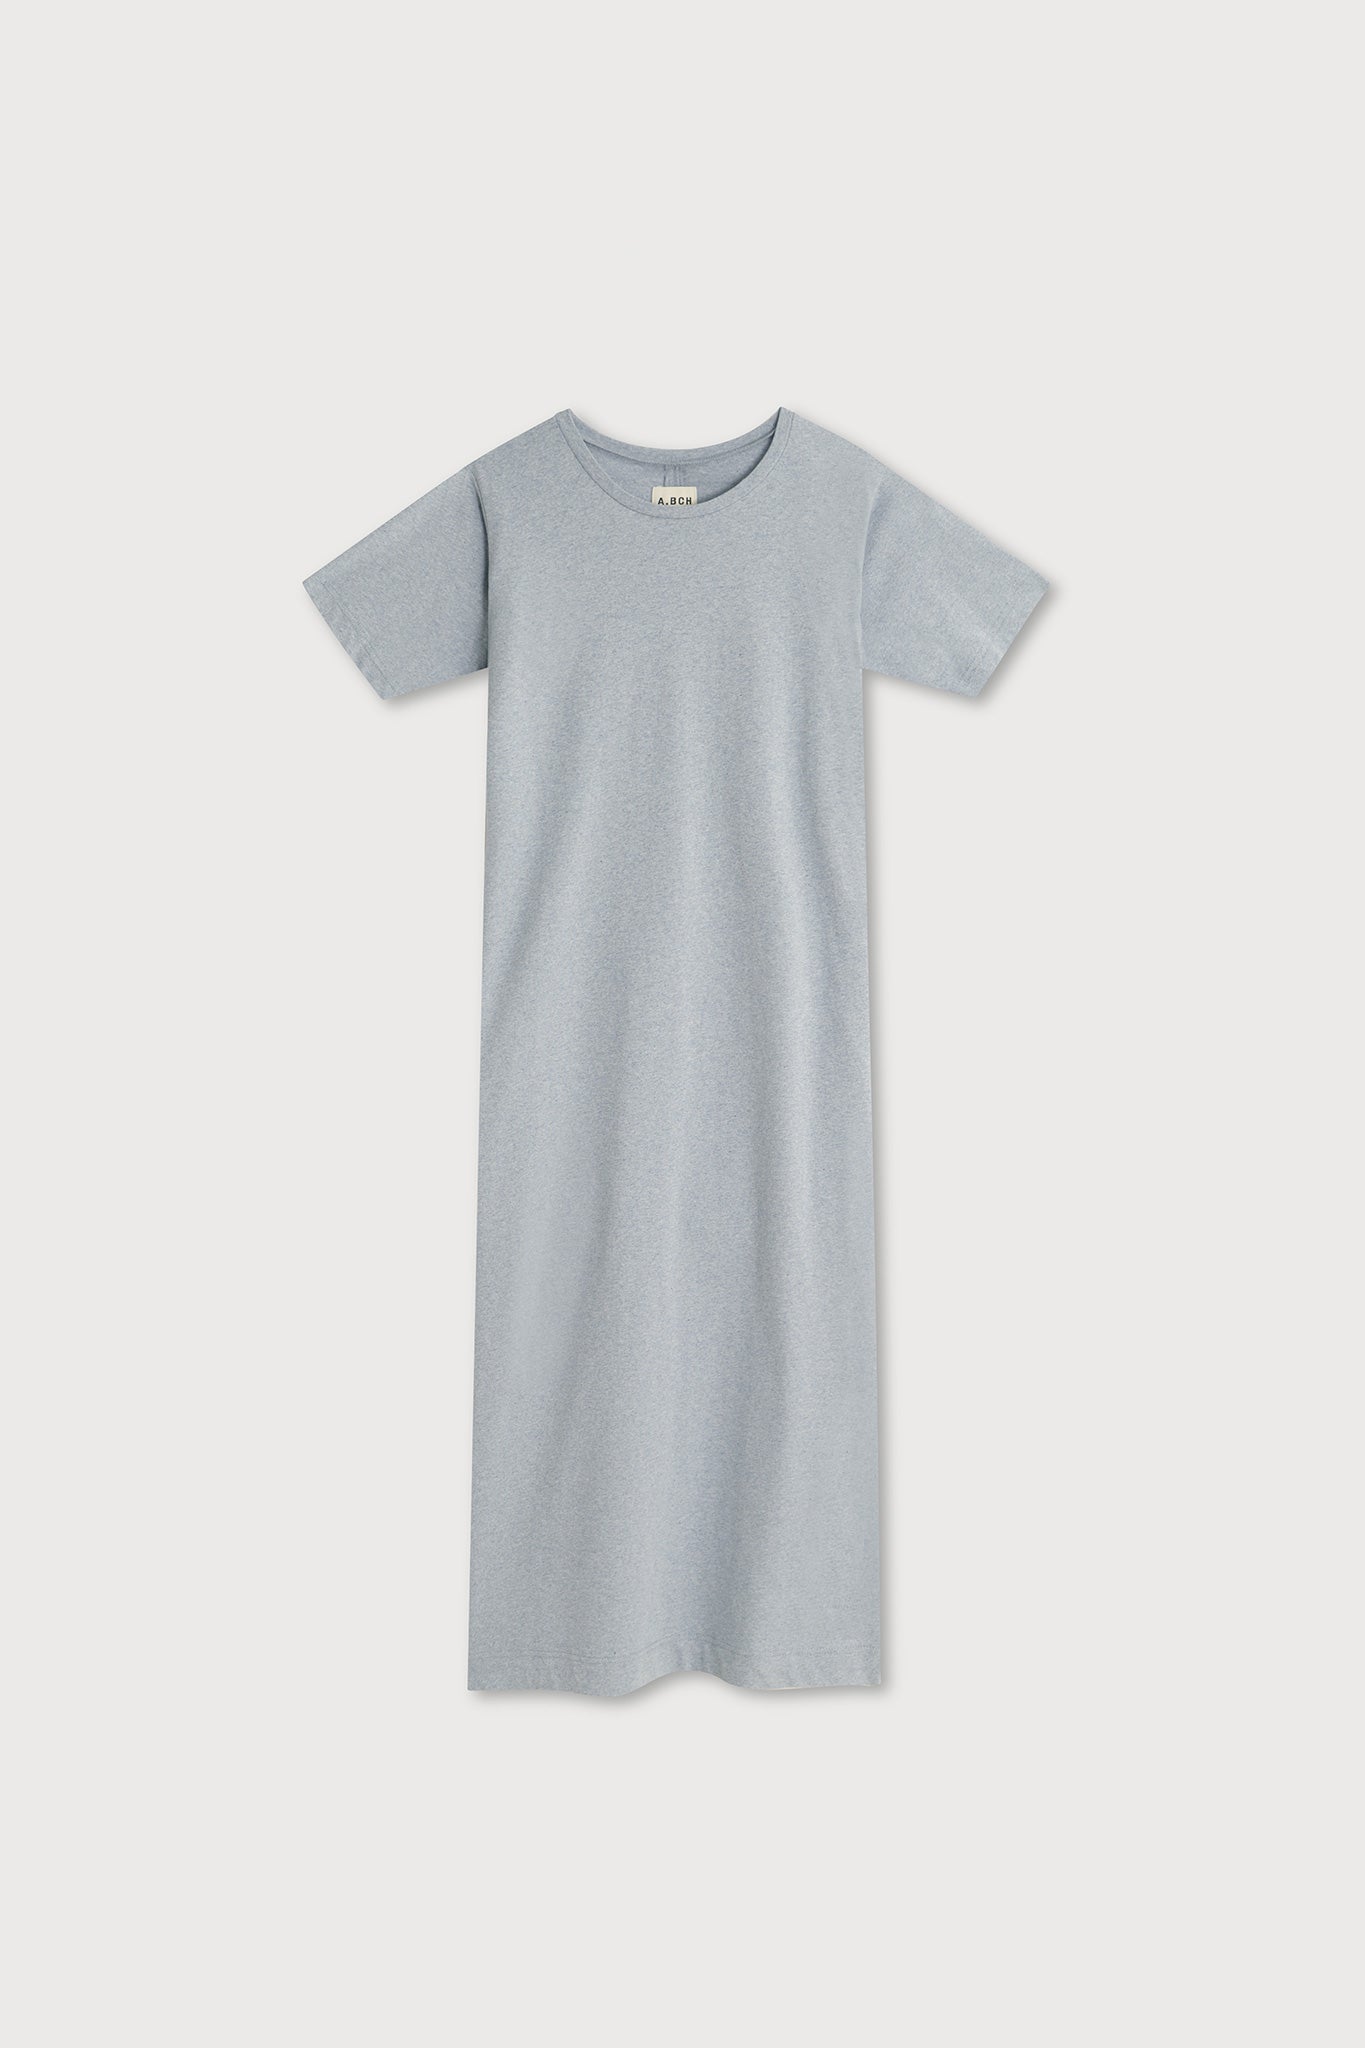 A.56 Light Blue Marle Maxi T-Shirt Dress in Recycled + Organic Cotton